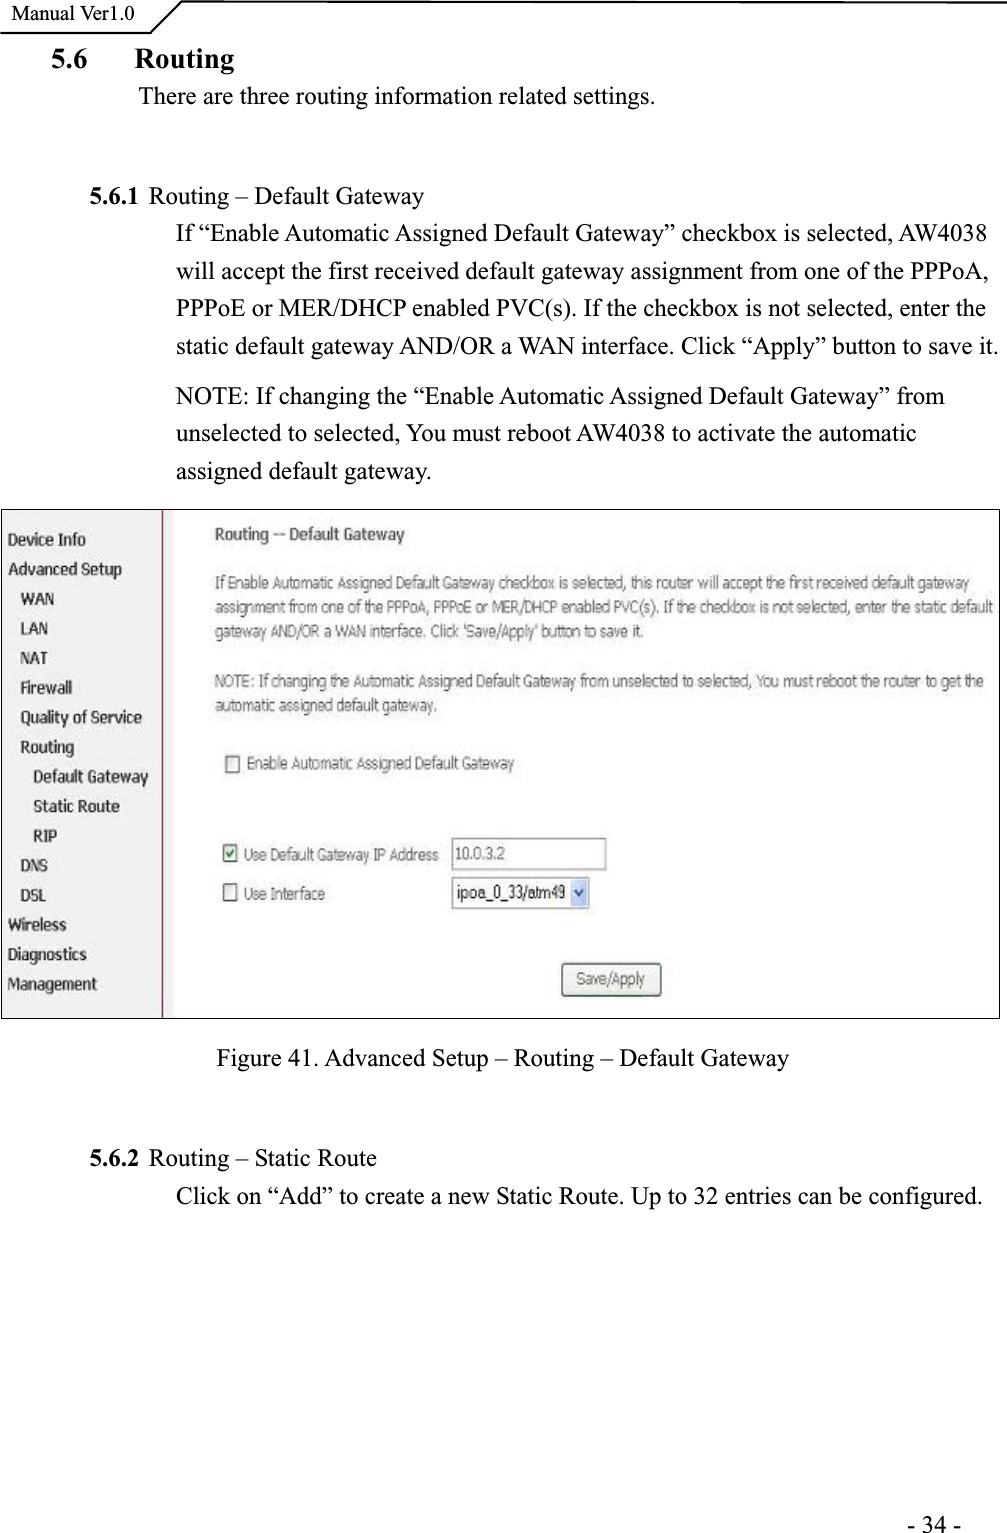  Manual Ver1.05.6 Routing There are three routing information related settings.5.6.1 Routing – Default Gateway If “Enable Automatic Assigned Default Gateway” checkbox is selected, AW4038will accept the first received default gateway assignment from one of the PPPoA, PPPoE or MER/DHCP enabled PVC(s). If the checkbox is not selected, enter the static default gateway AND/OR a WAN interface. Click “Apply” button to save it. NOTE: If changing the “Enable Automatic Assigned Default Gateway” fromunselected to selected, You must reboot AW4038 to activate the automaticassigned default gateway.Figure 41. Advanced Setup – Routing – Default Gateway 5.6.2 Routing – Static Route Click on “Add” to create a new Static Route. Up to 32 entries can be configured.                                                                      -34-